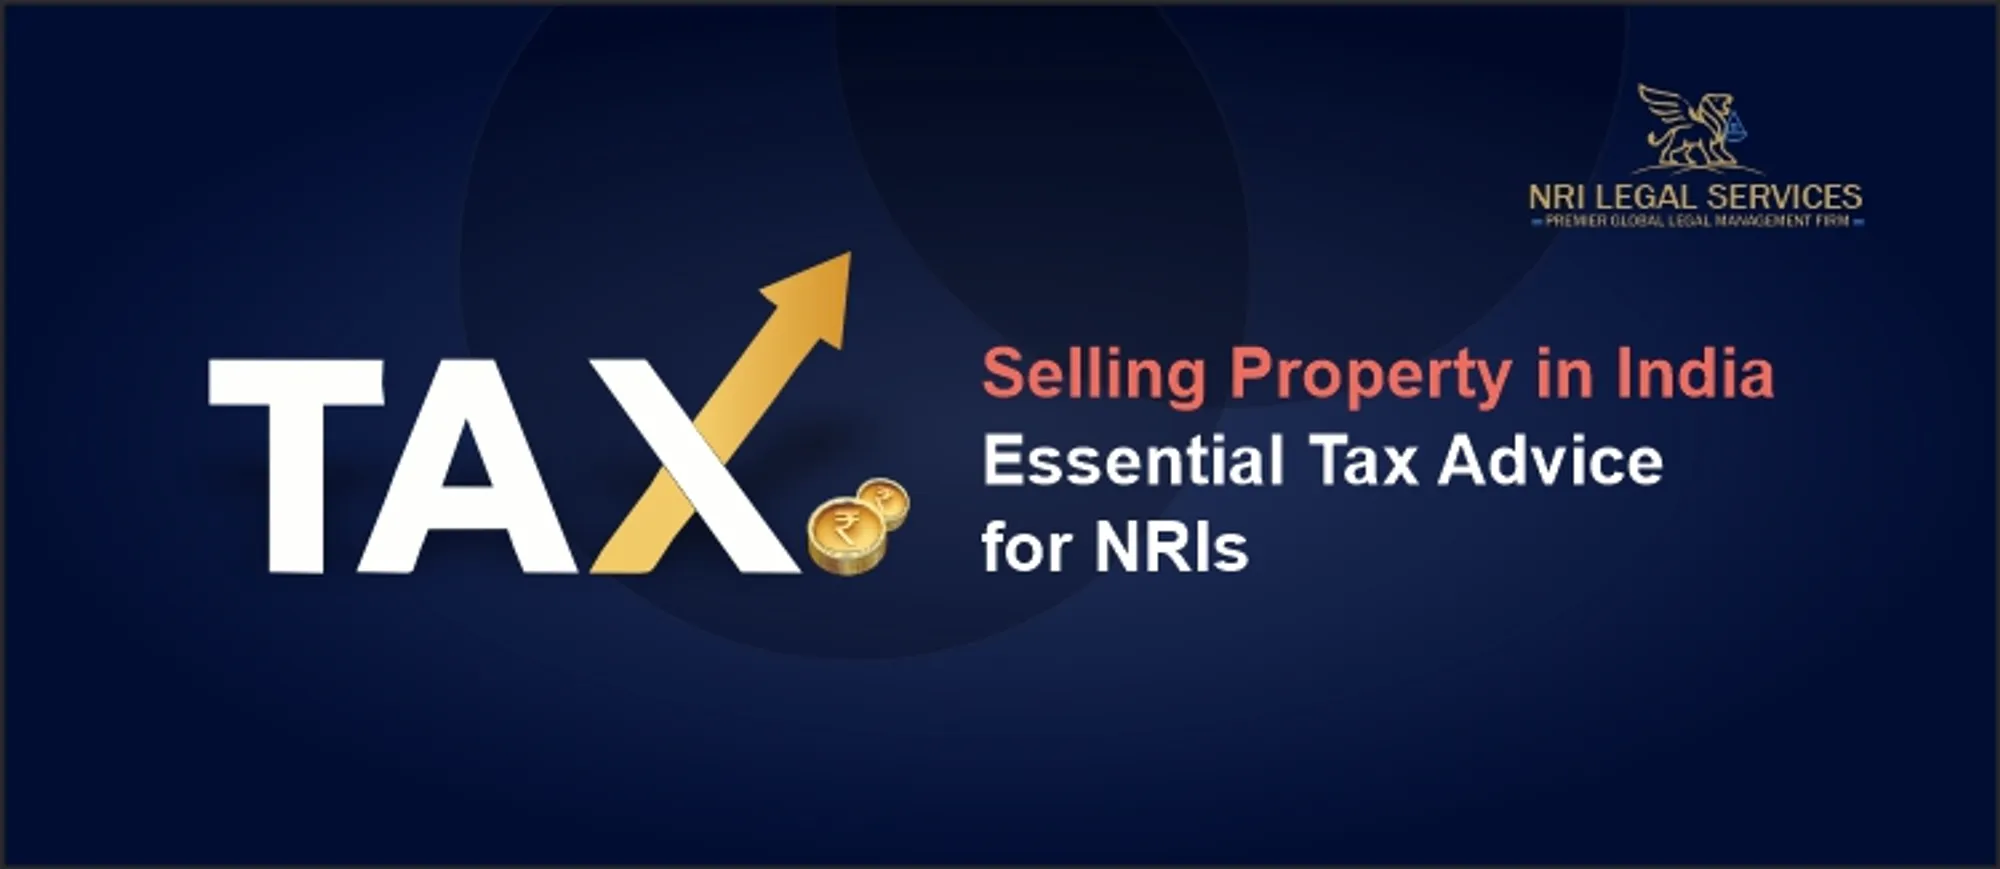 Selling Property in India – Essential Tax Advice for NRIs